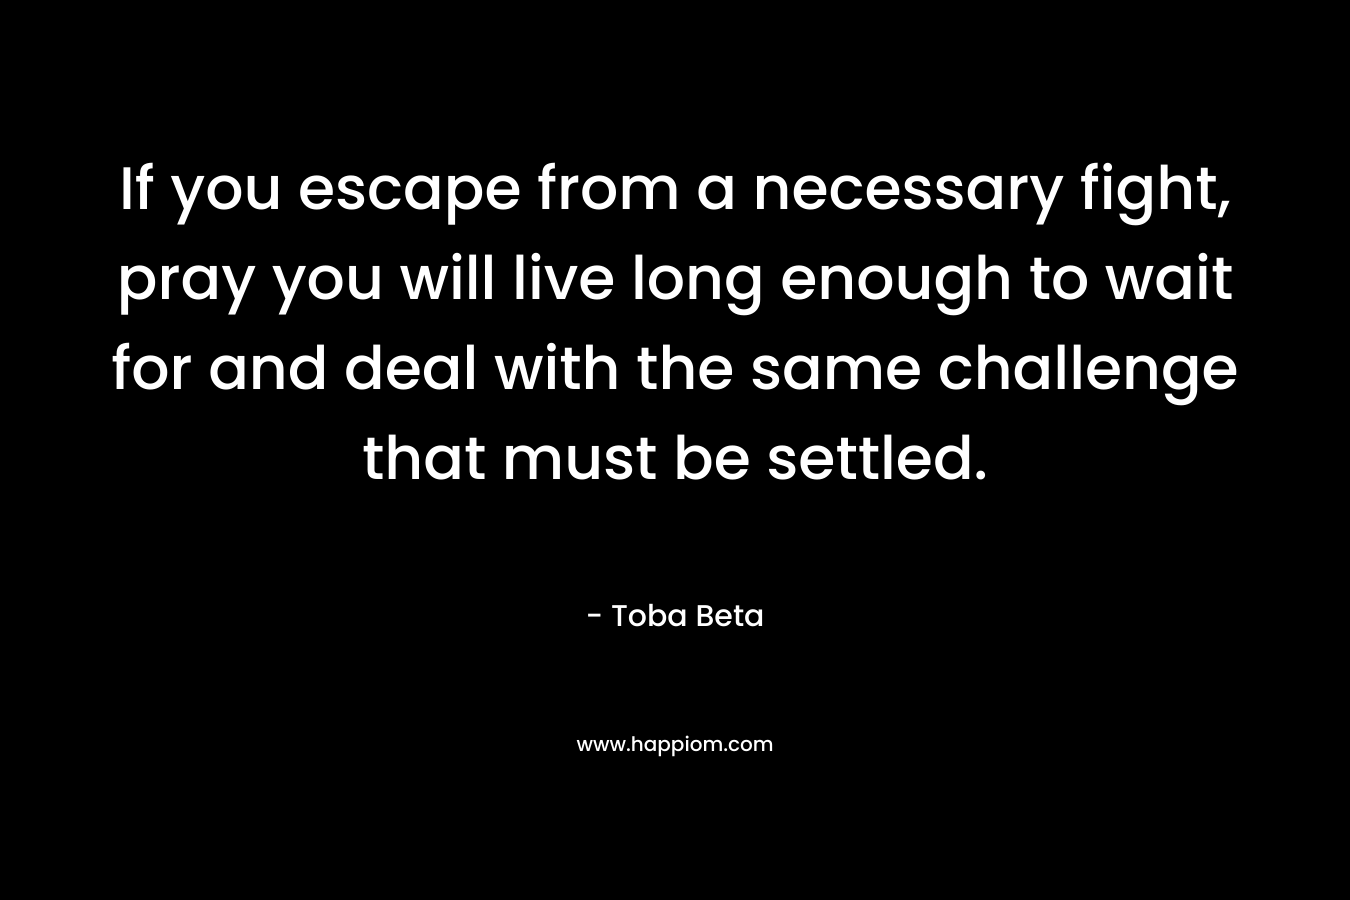 If you escape from a necessary fight, pray you will live long enough to wait for and deal with the same challenge that must be settled. – Toba Beta